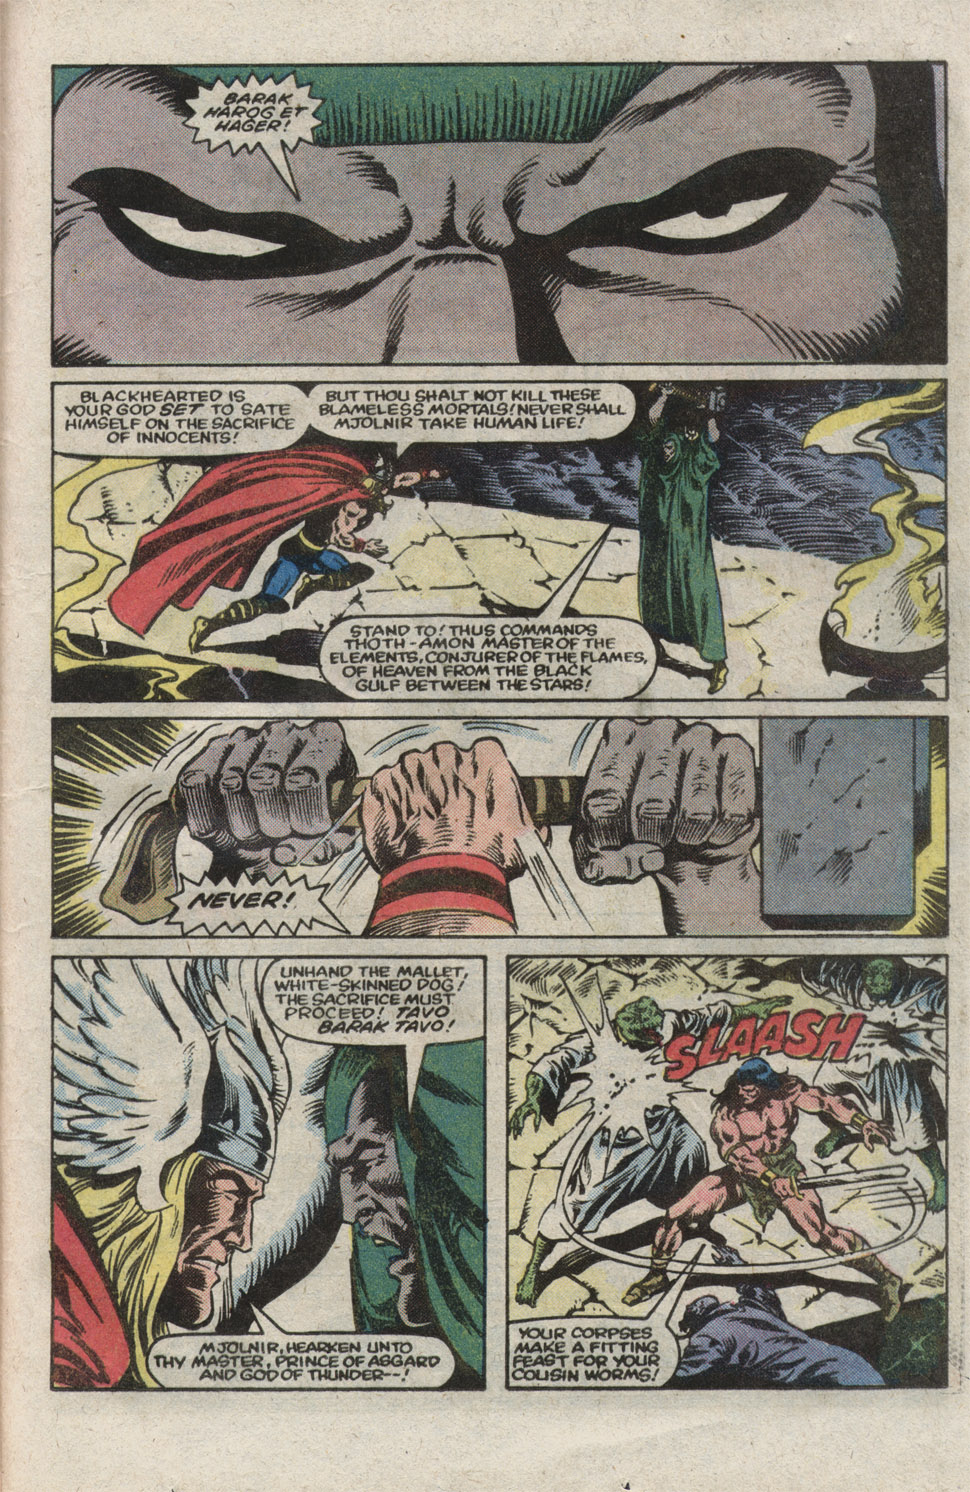 What If? (1977) issue 39 - Thor battled conan - Page 37